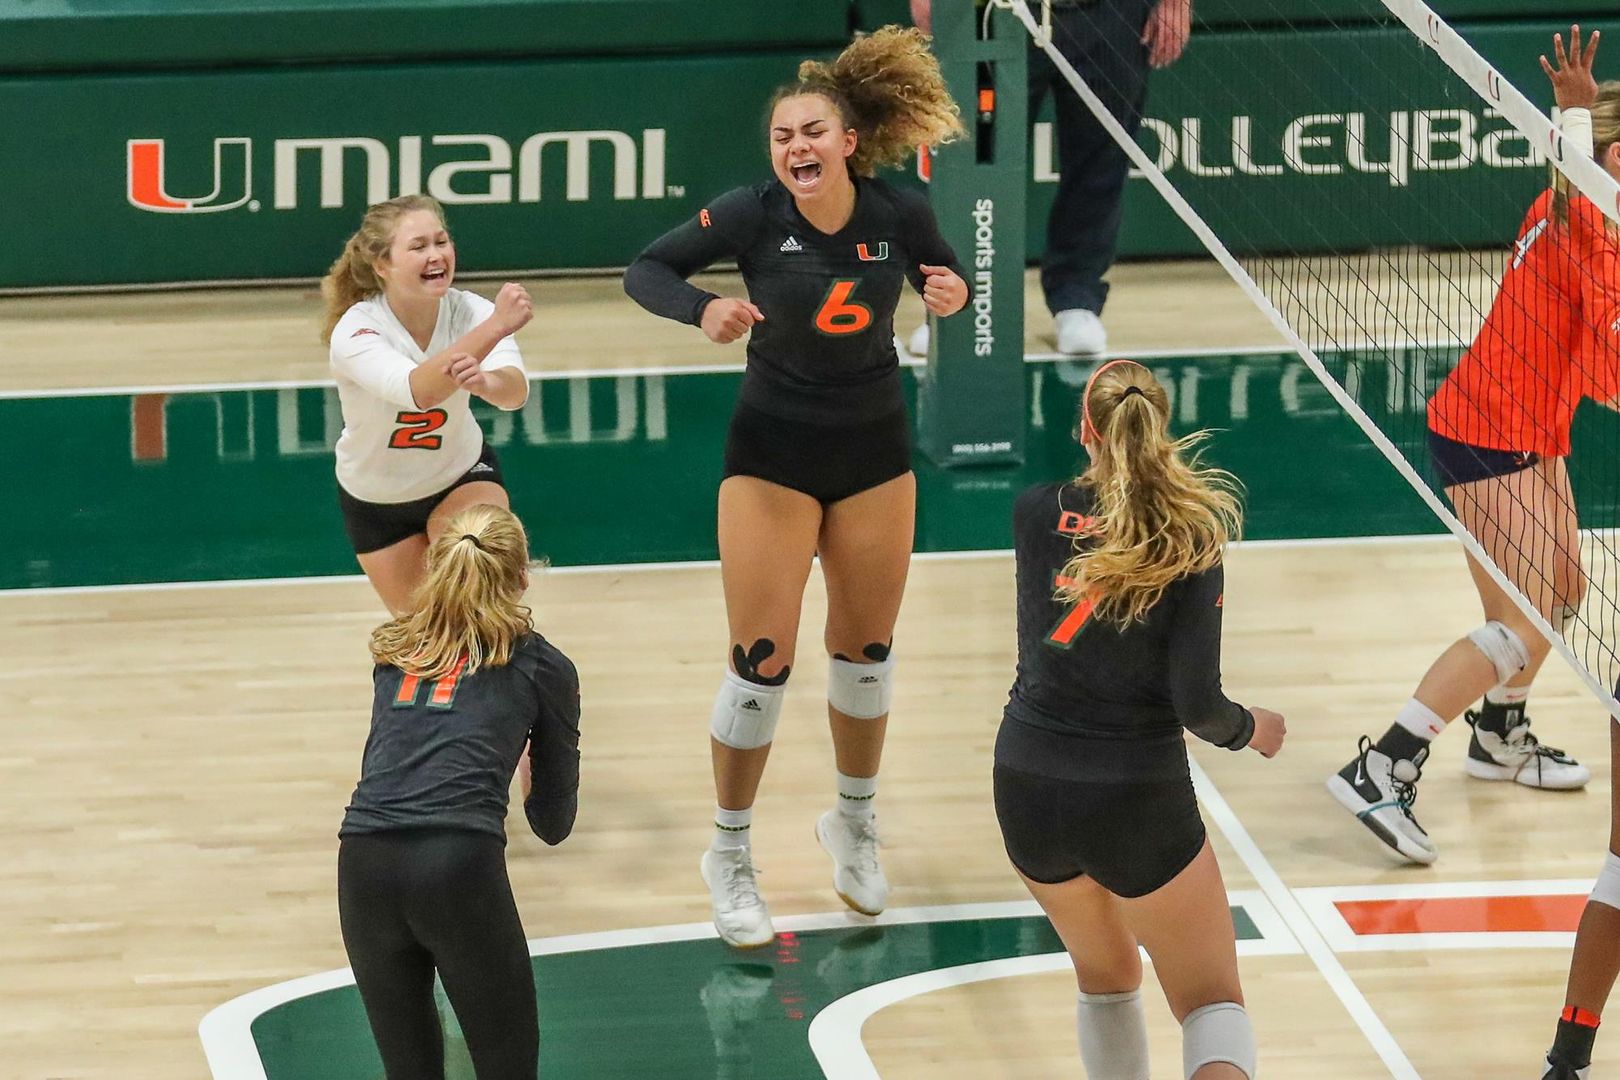 Canes Volleyball Victorious Over Virginia